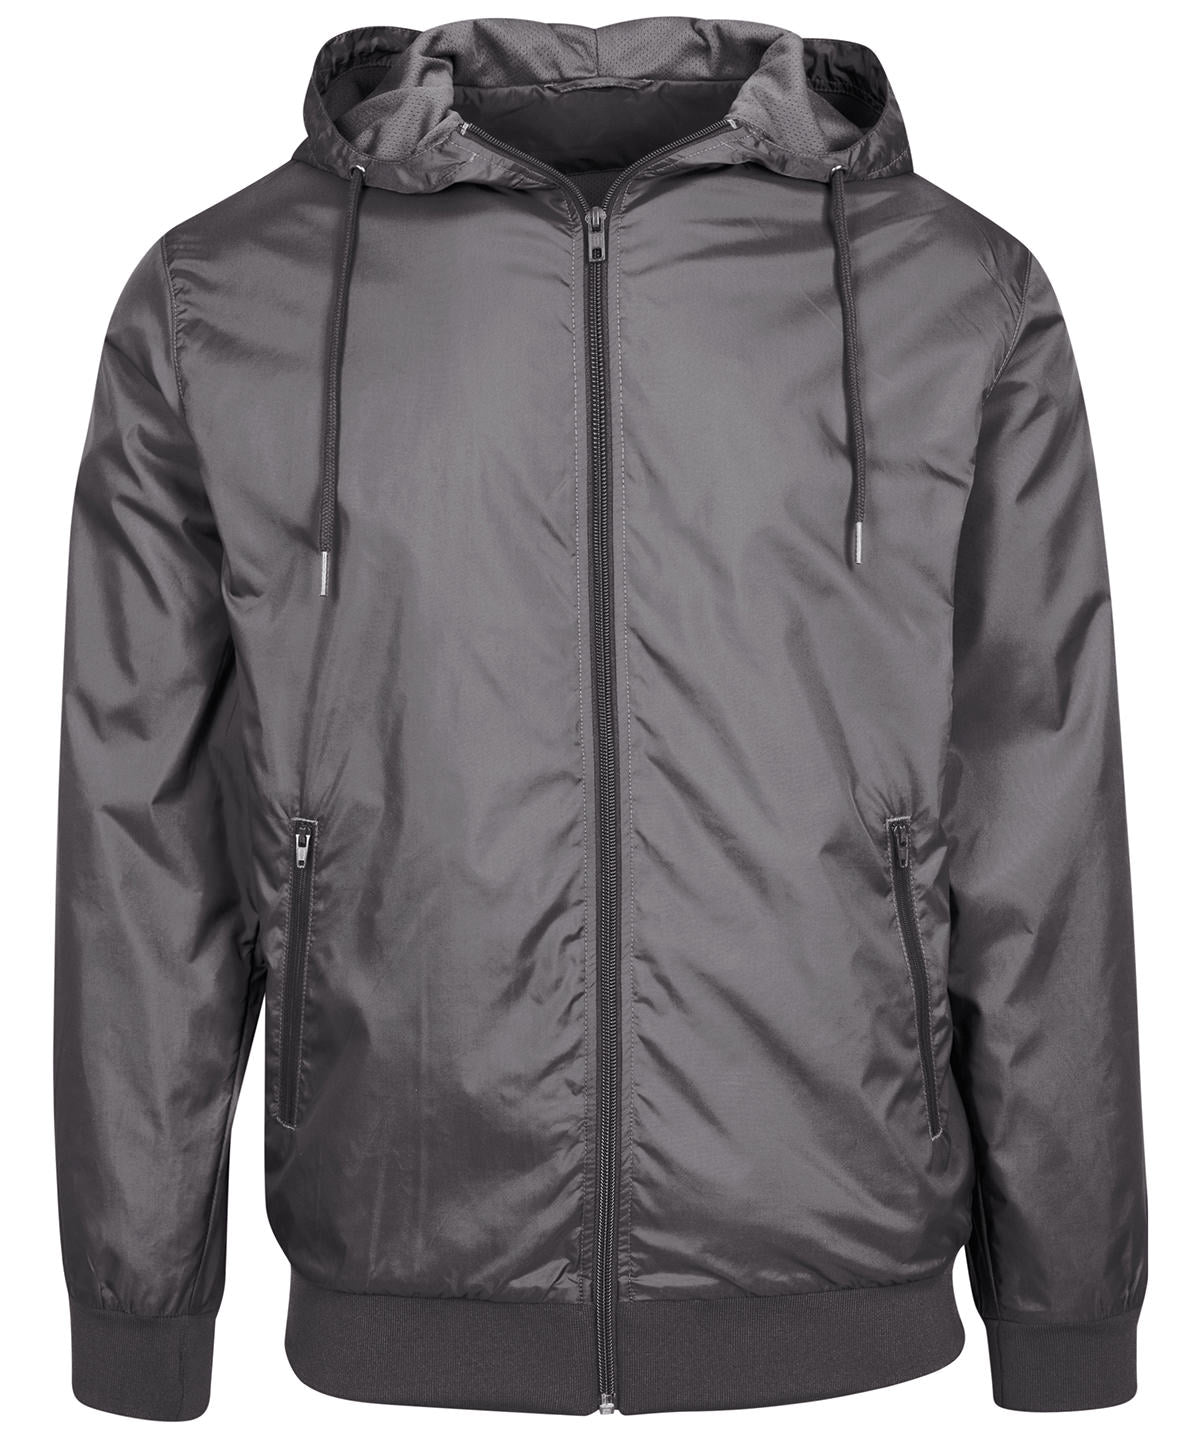 Personalised Jackets - Black Build Your Brand Wind runner